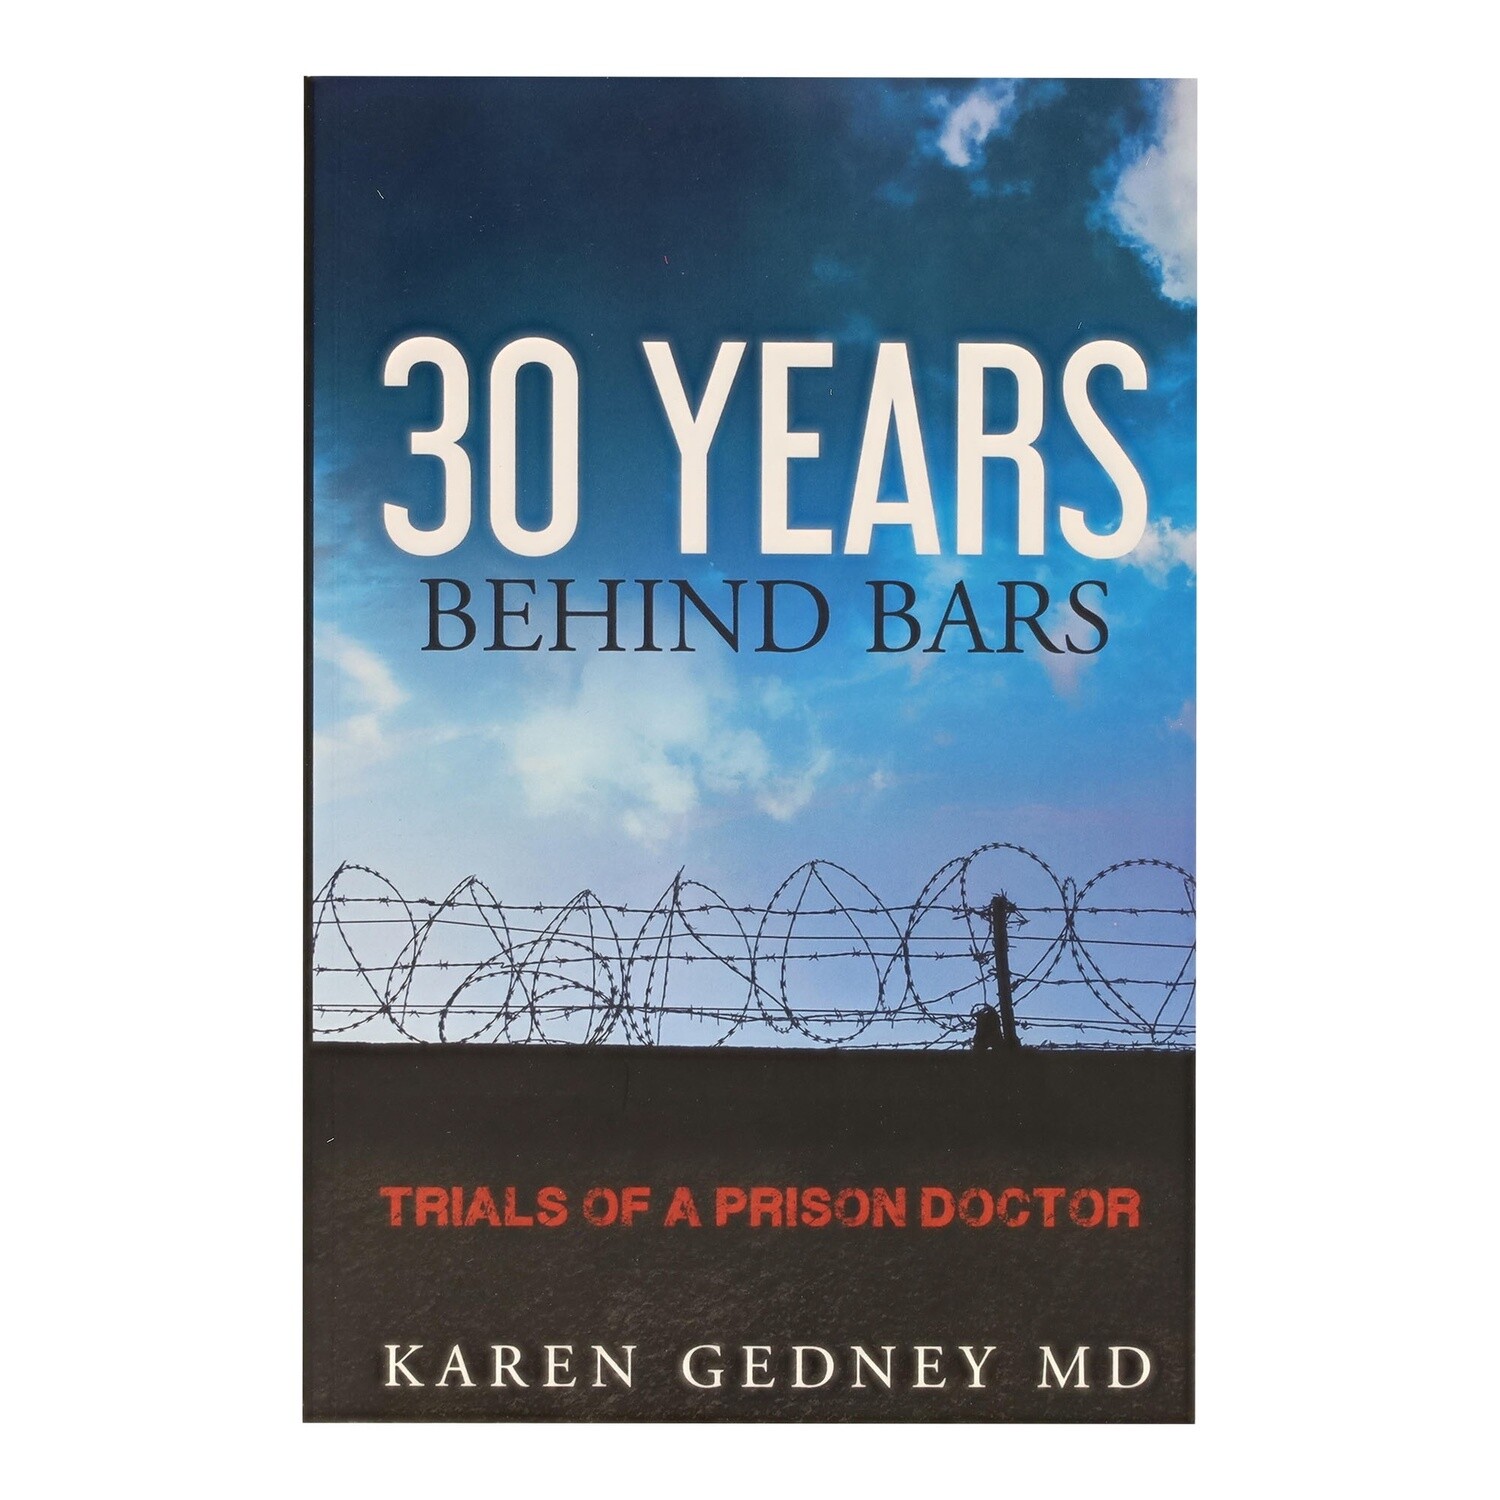 30 Years Behind Bars Trials of a Prison Doctor by Karen Gedney MD